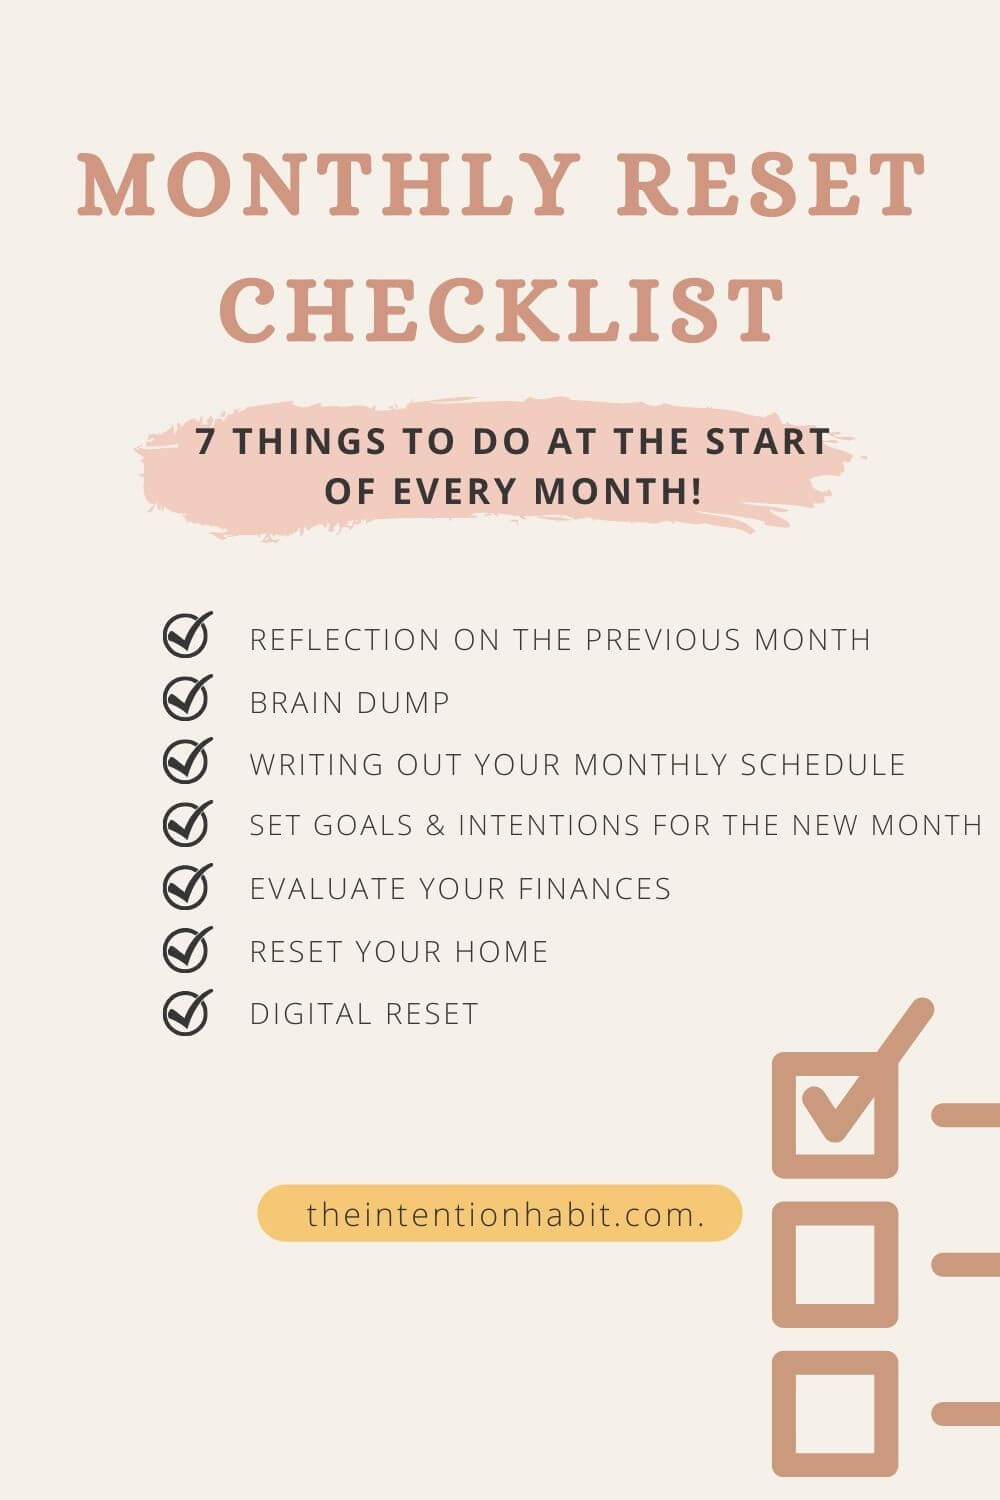 monthly reset checklist infographic.